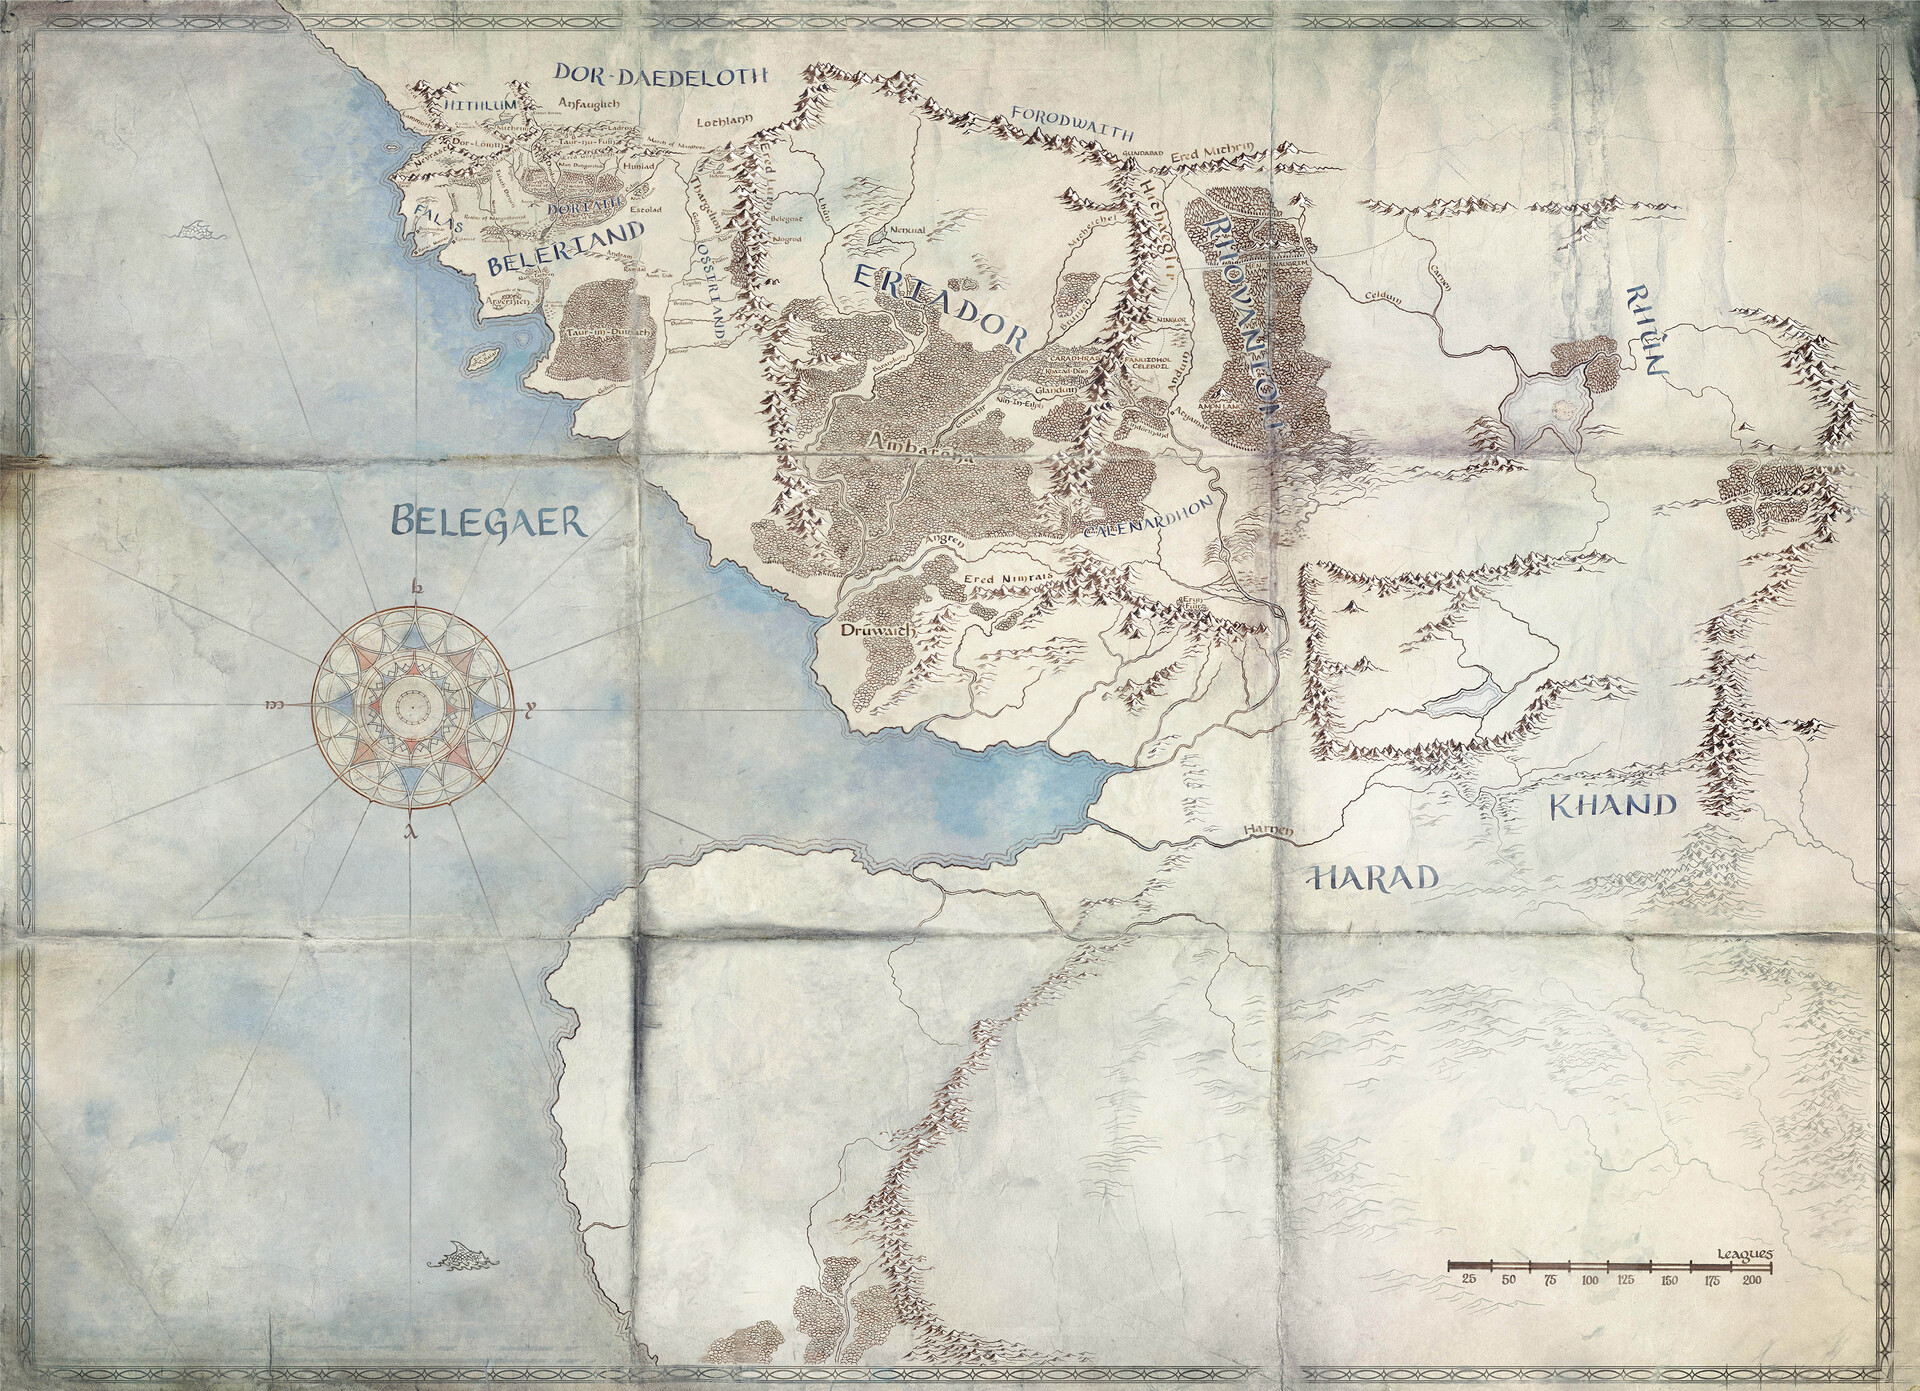 Was Beleriand bigger or smaller than Middle earth? - Quora